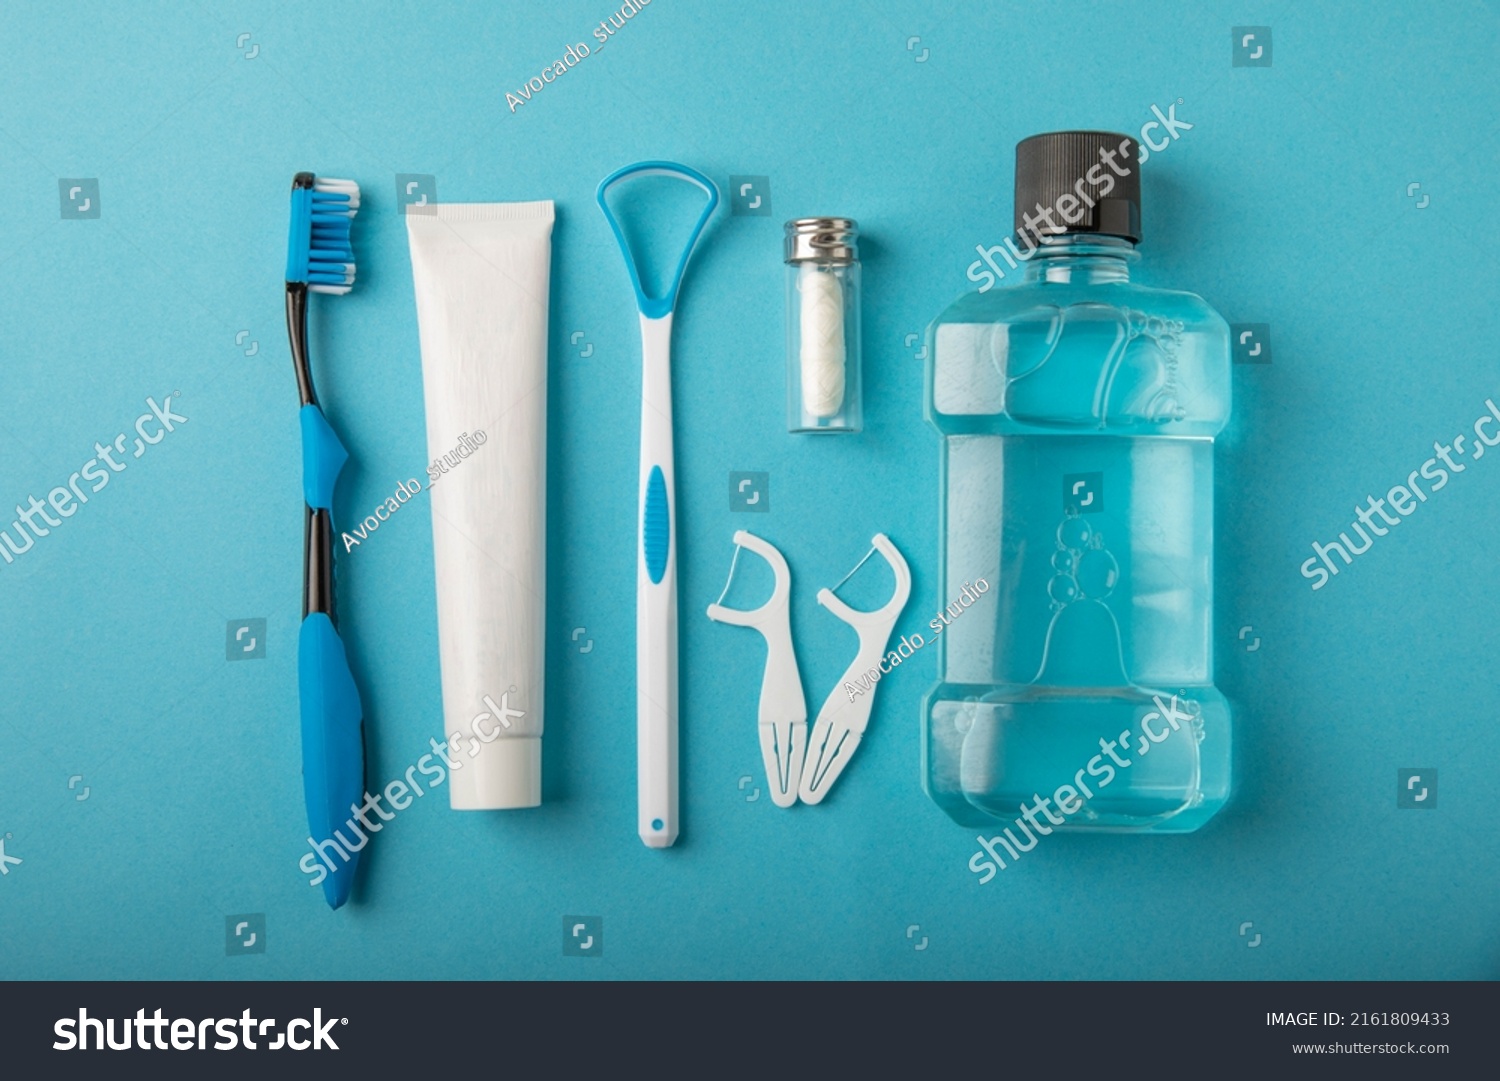 Toothbrush, tongue cleaner, floss, toothpaste tube and mouthwash on blue background with copy space. Flat lay. Dental hygiene. Oral care kit. Dentist concept. #2161809433